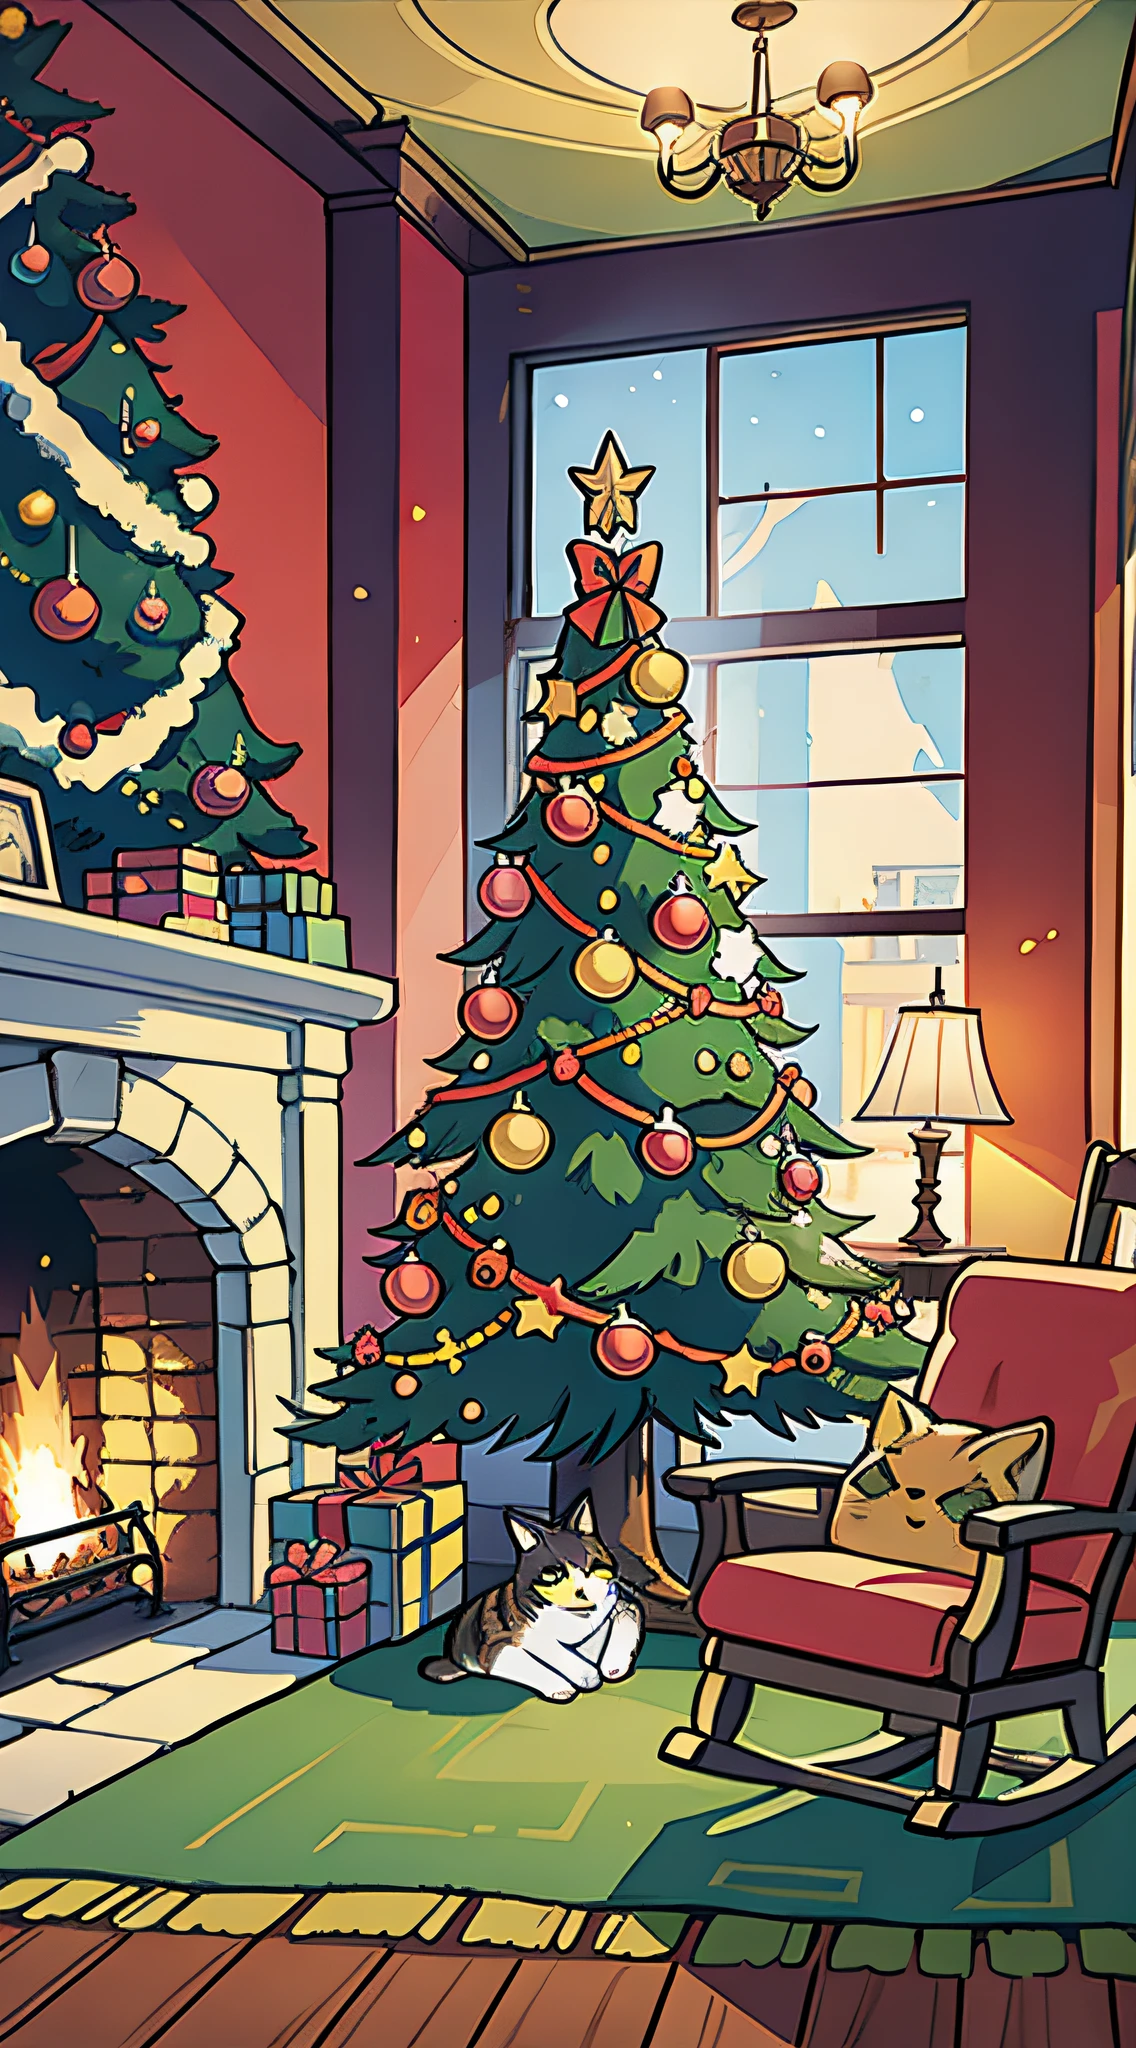 Indoors, Christmas tree, fireplace, a person lying on rocking chair reading a book, carpet, a cat, warm colors, bright colors